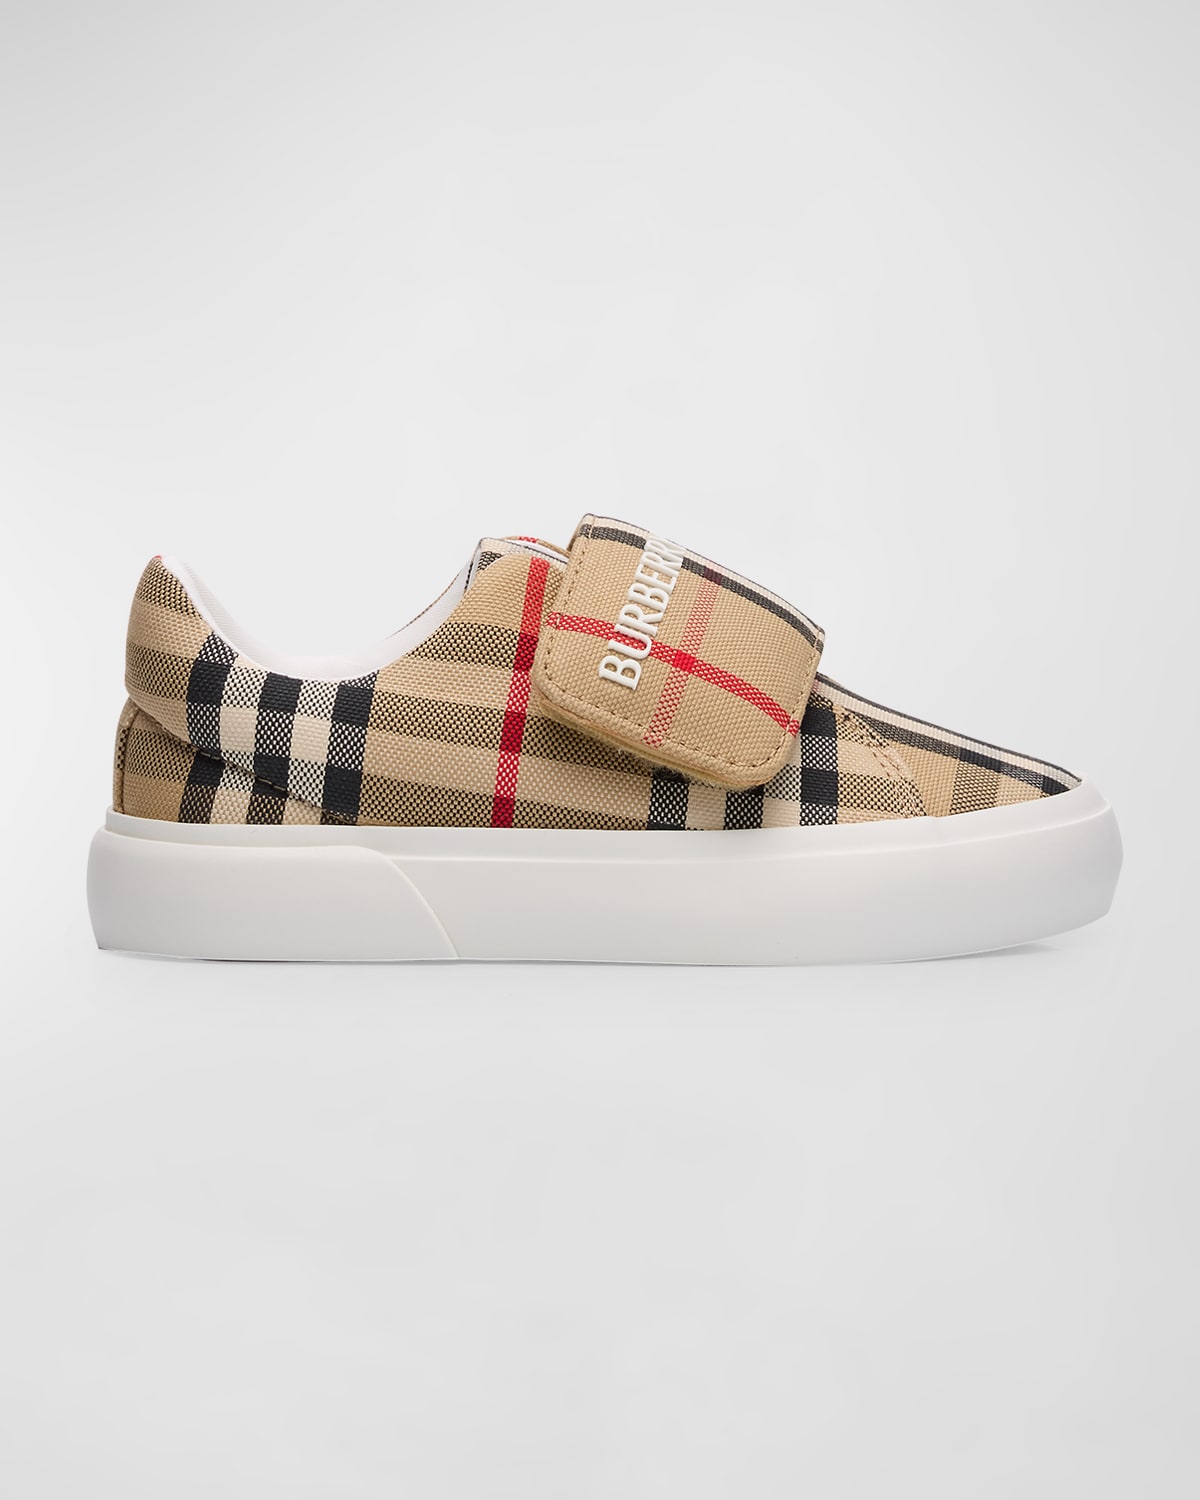 BURBERRY KID'S JAMES CHECK-PRINT SNEAKERS, TODDLERS/KIDS